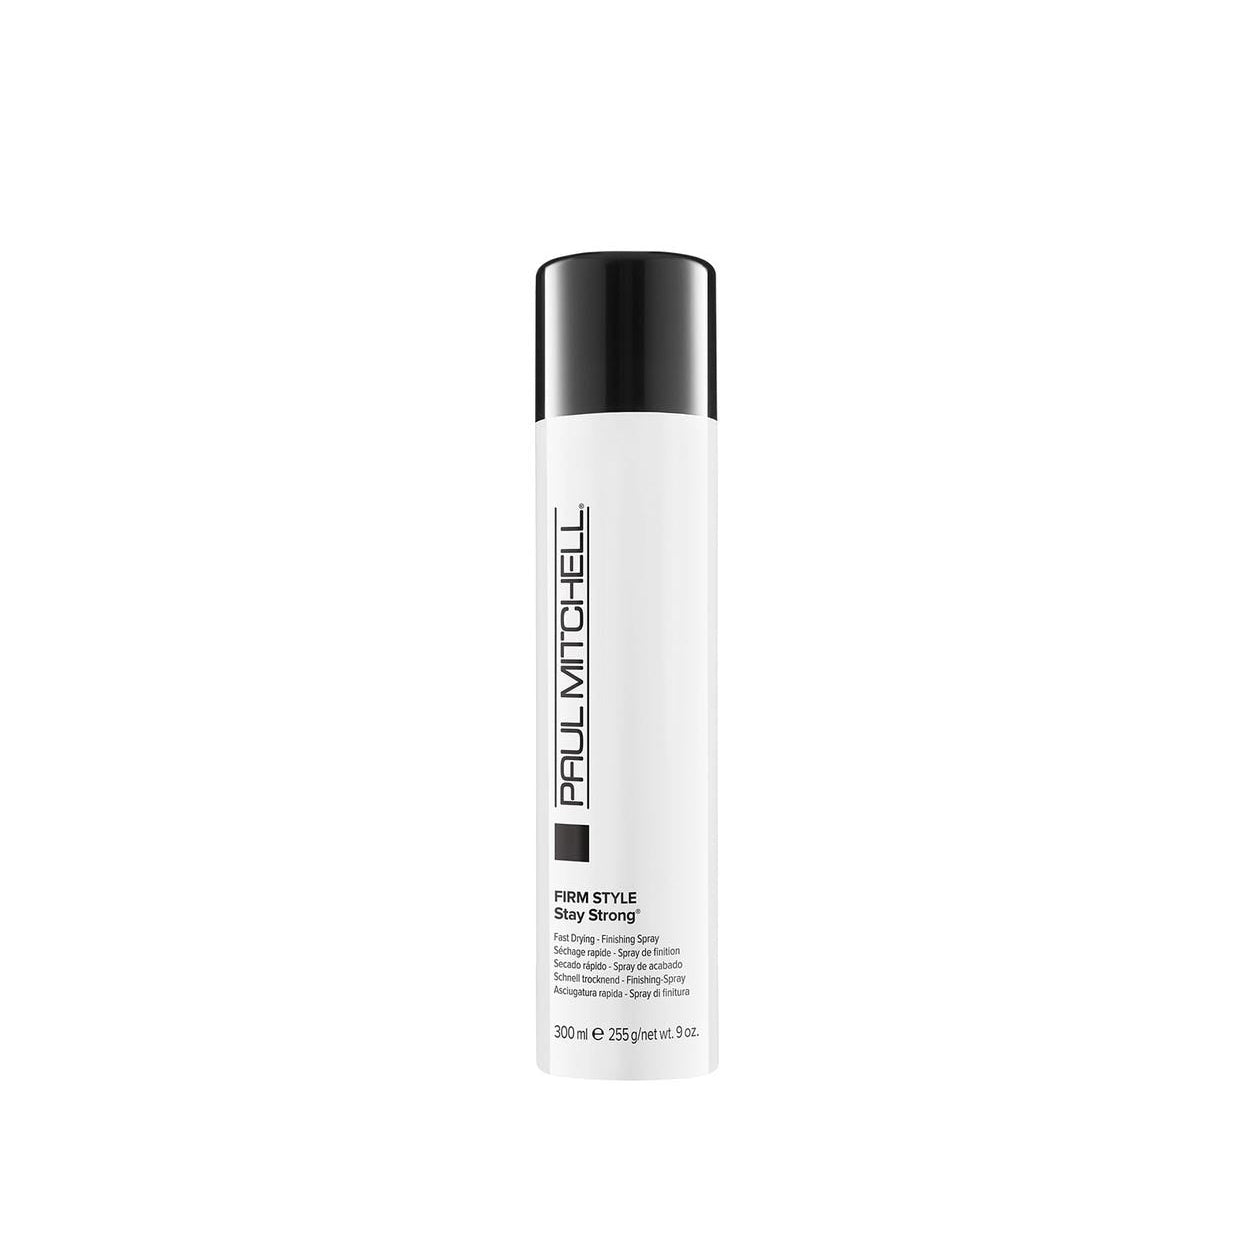 Paul Mitchell Stay Strong Hársprey 300ml